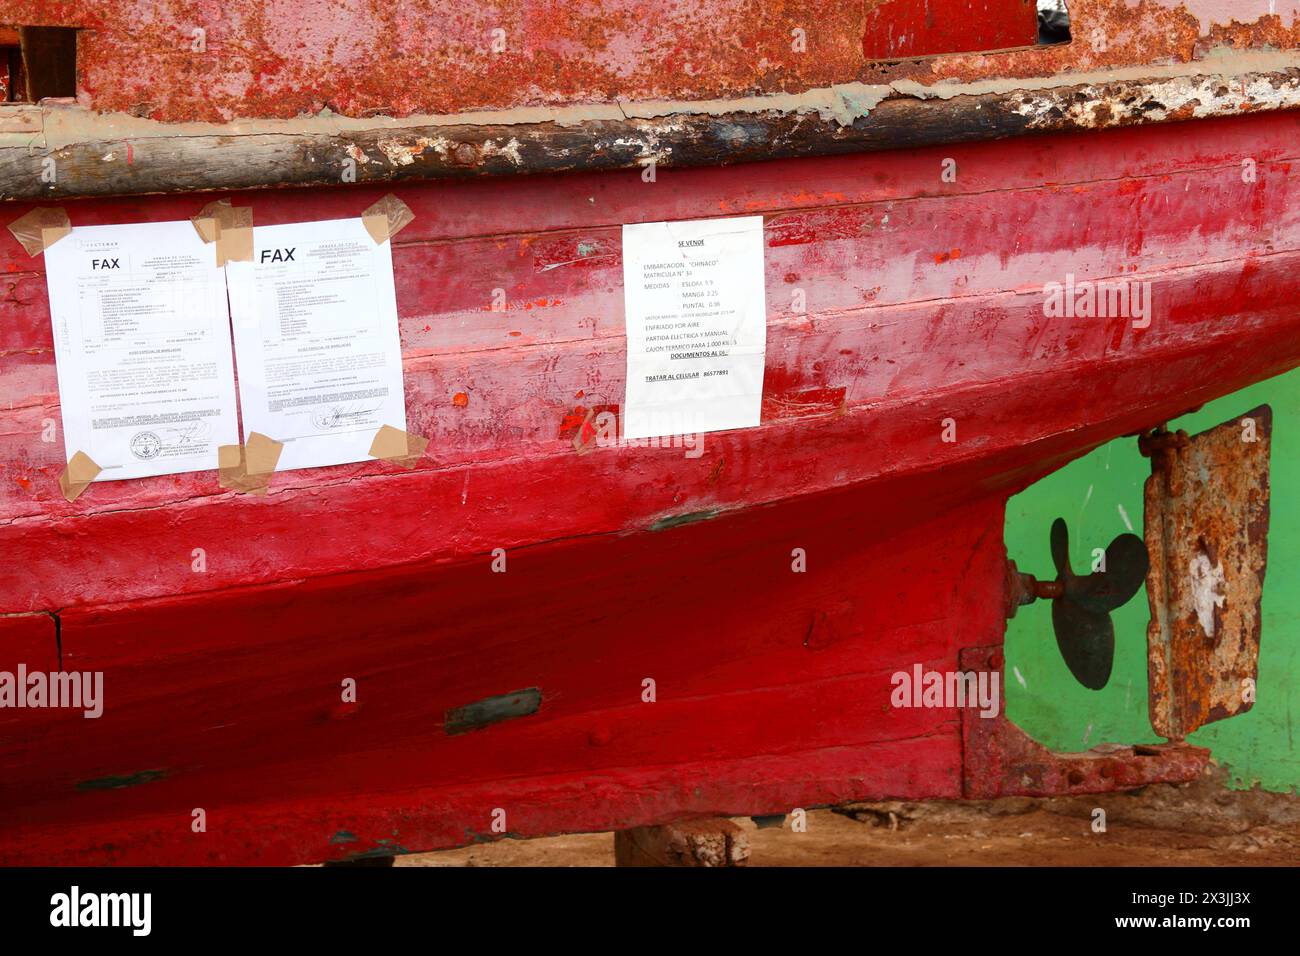 Printed faxes with warnings from Chilean Navy about bad weather and storm surges taped to side of old wooden fishing boat in port, Arica, Chile Stock Photo